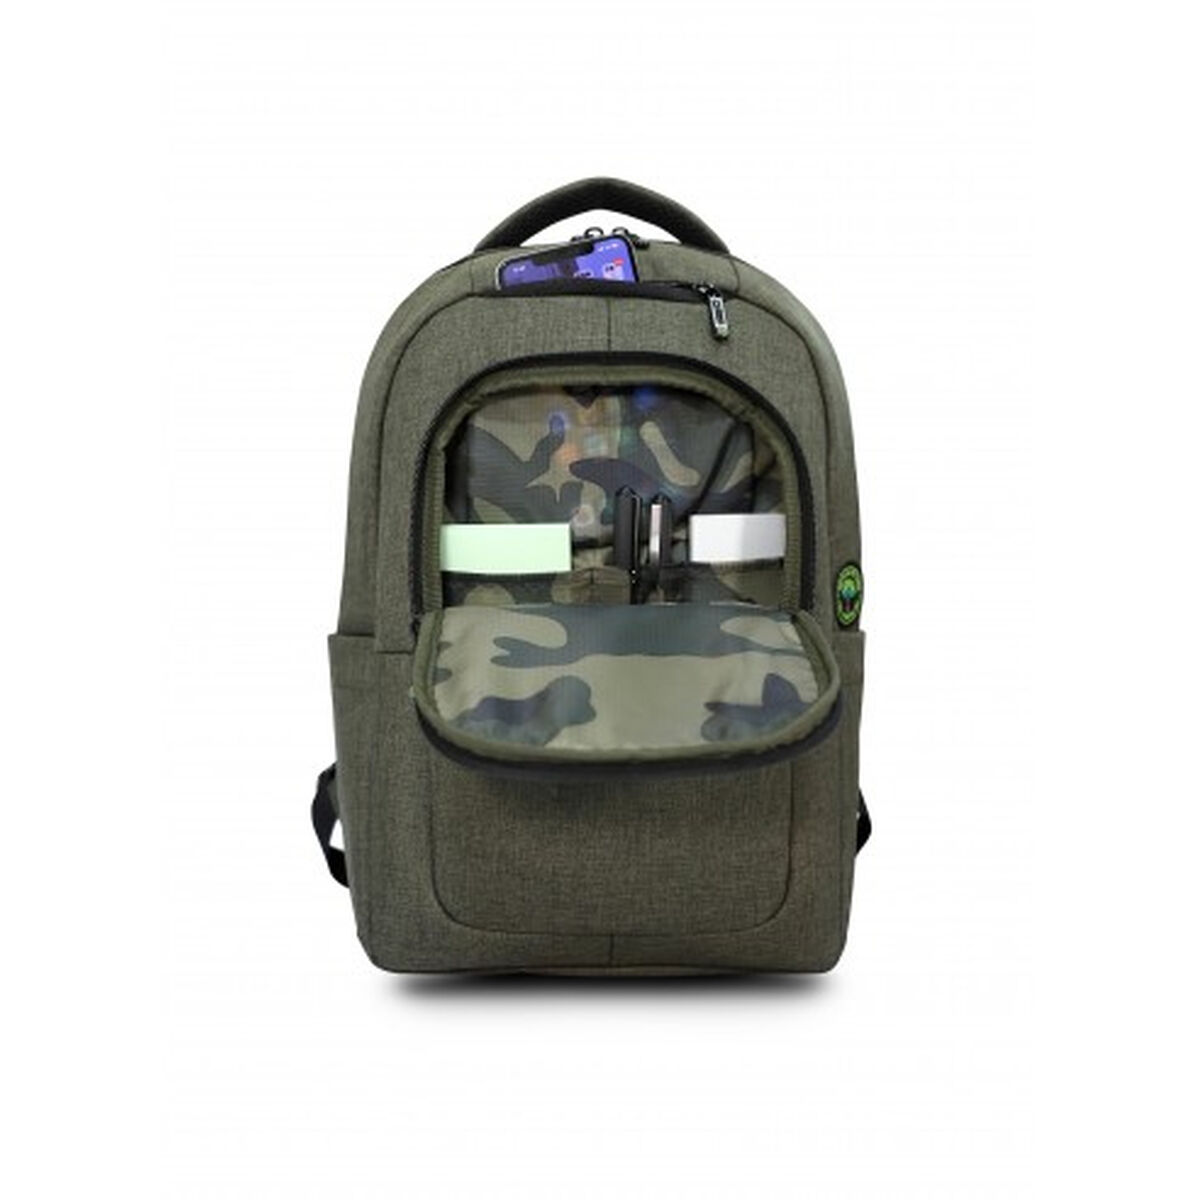 Laptop Backpack Urban Factory CYCLEE EDITION 14"